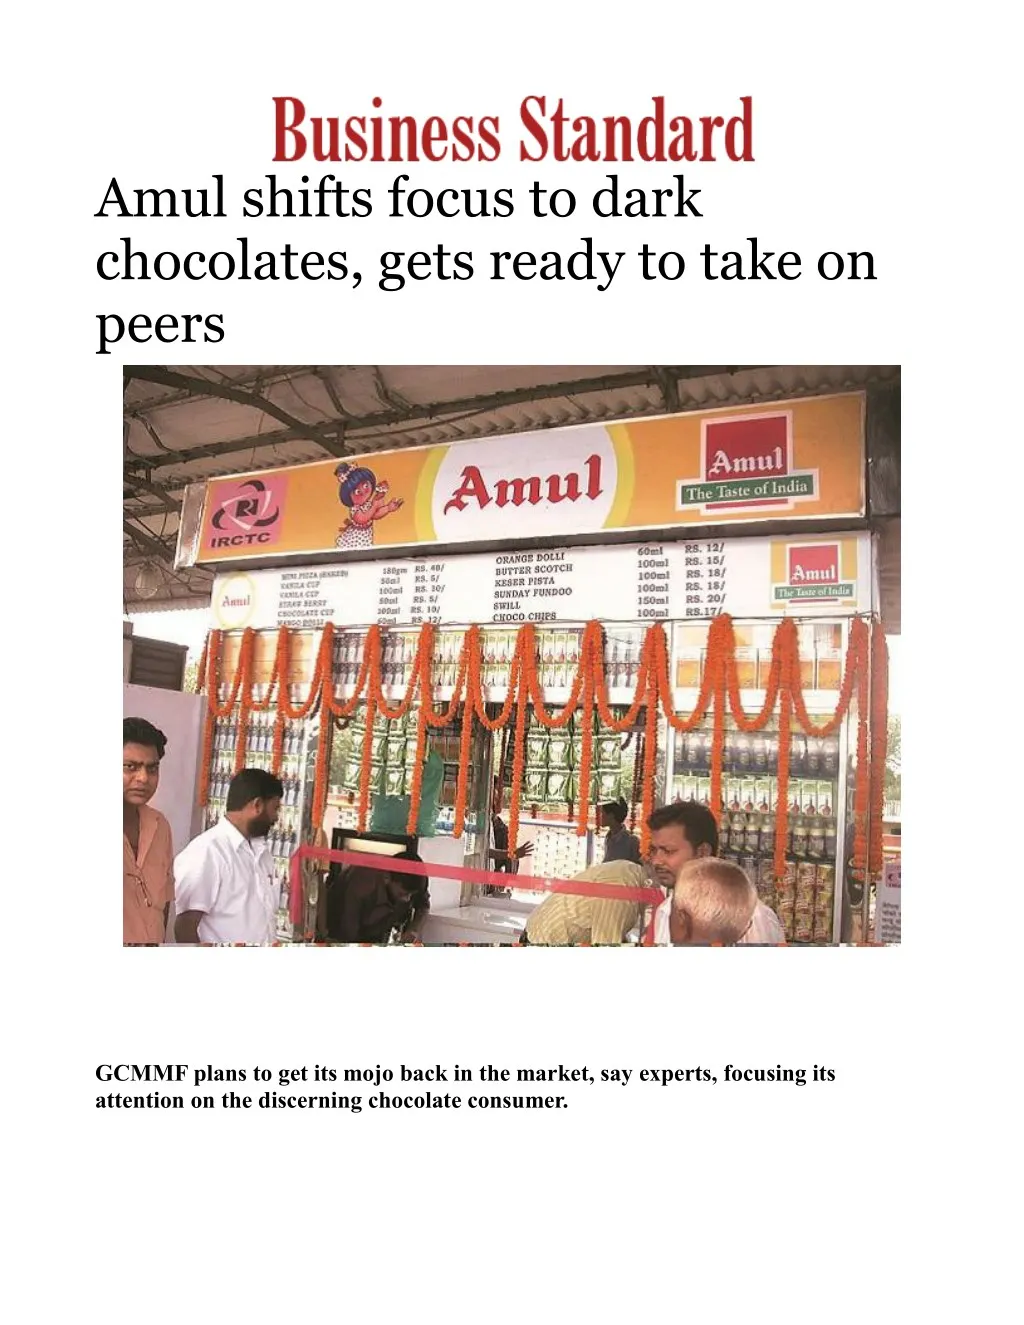 amul shifts focus to dark chocolates gets ready